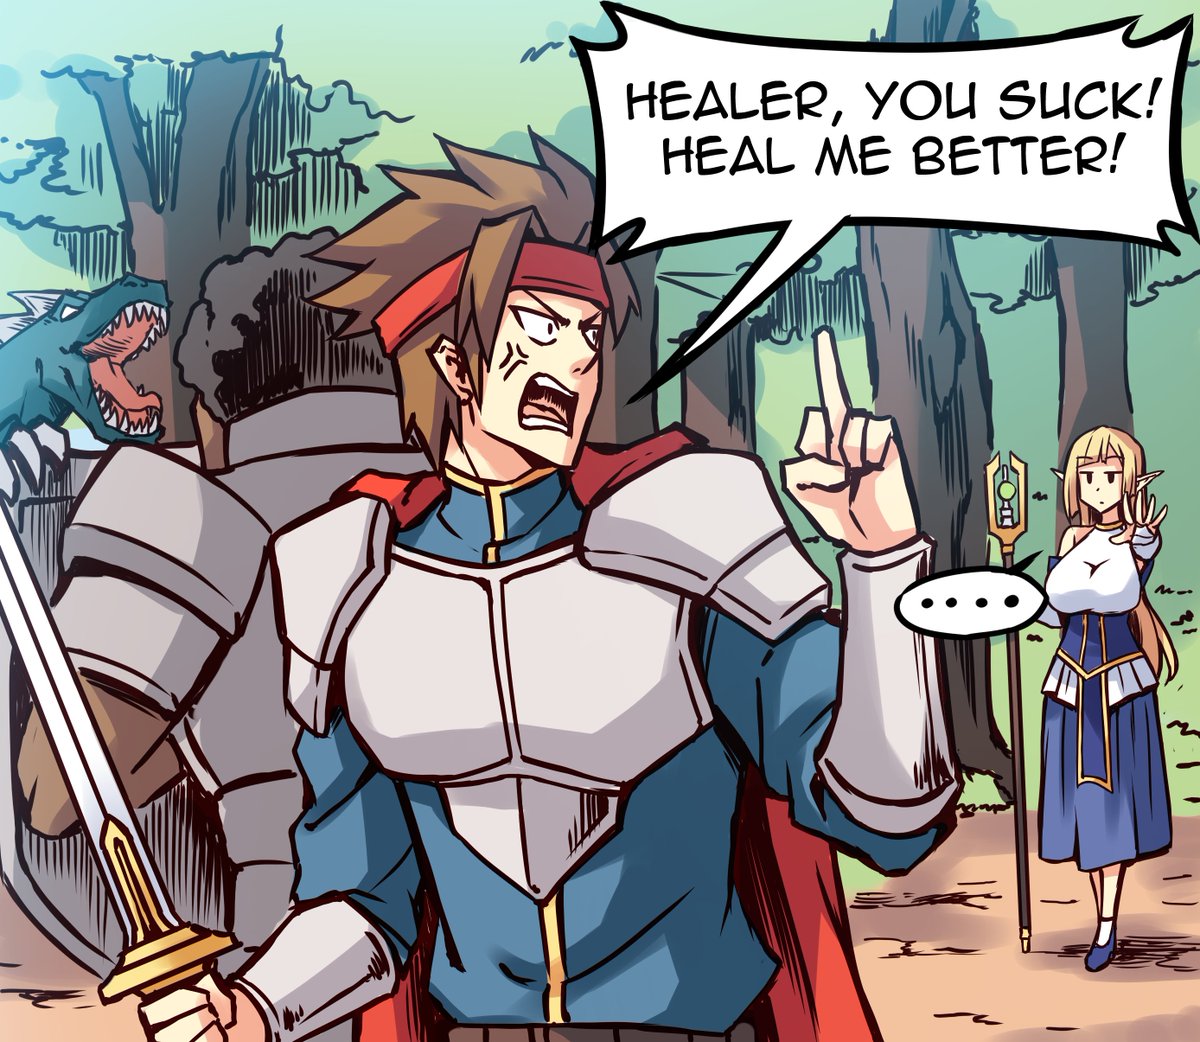 I wrote a comic about healers in MMO's! 